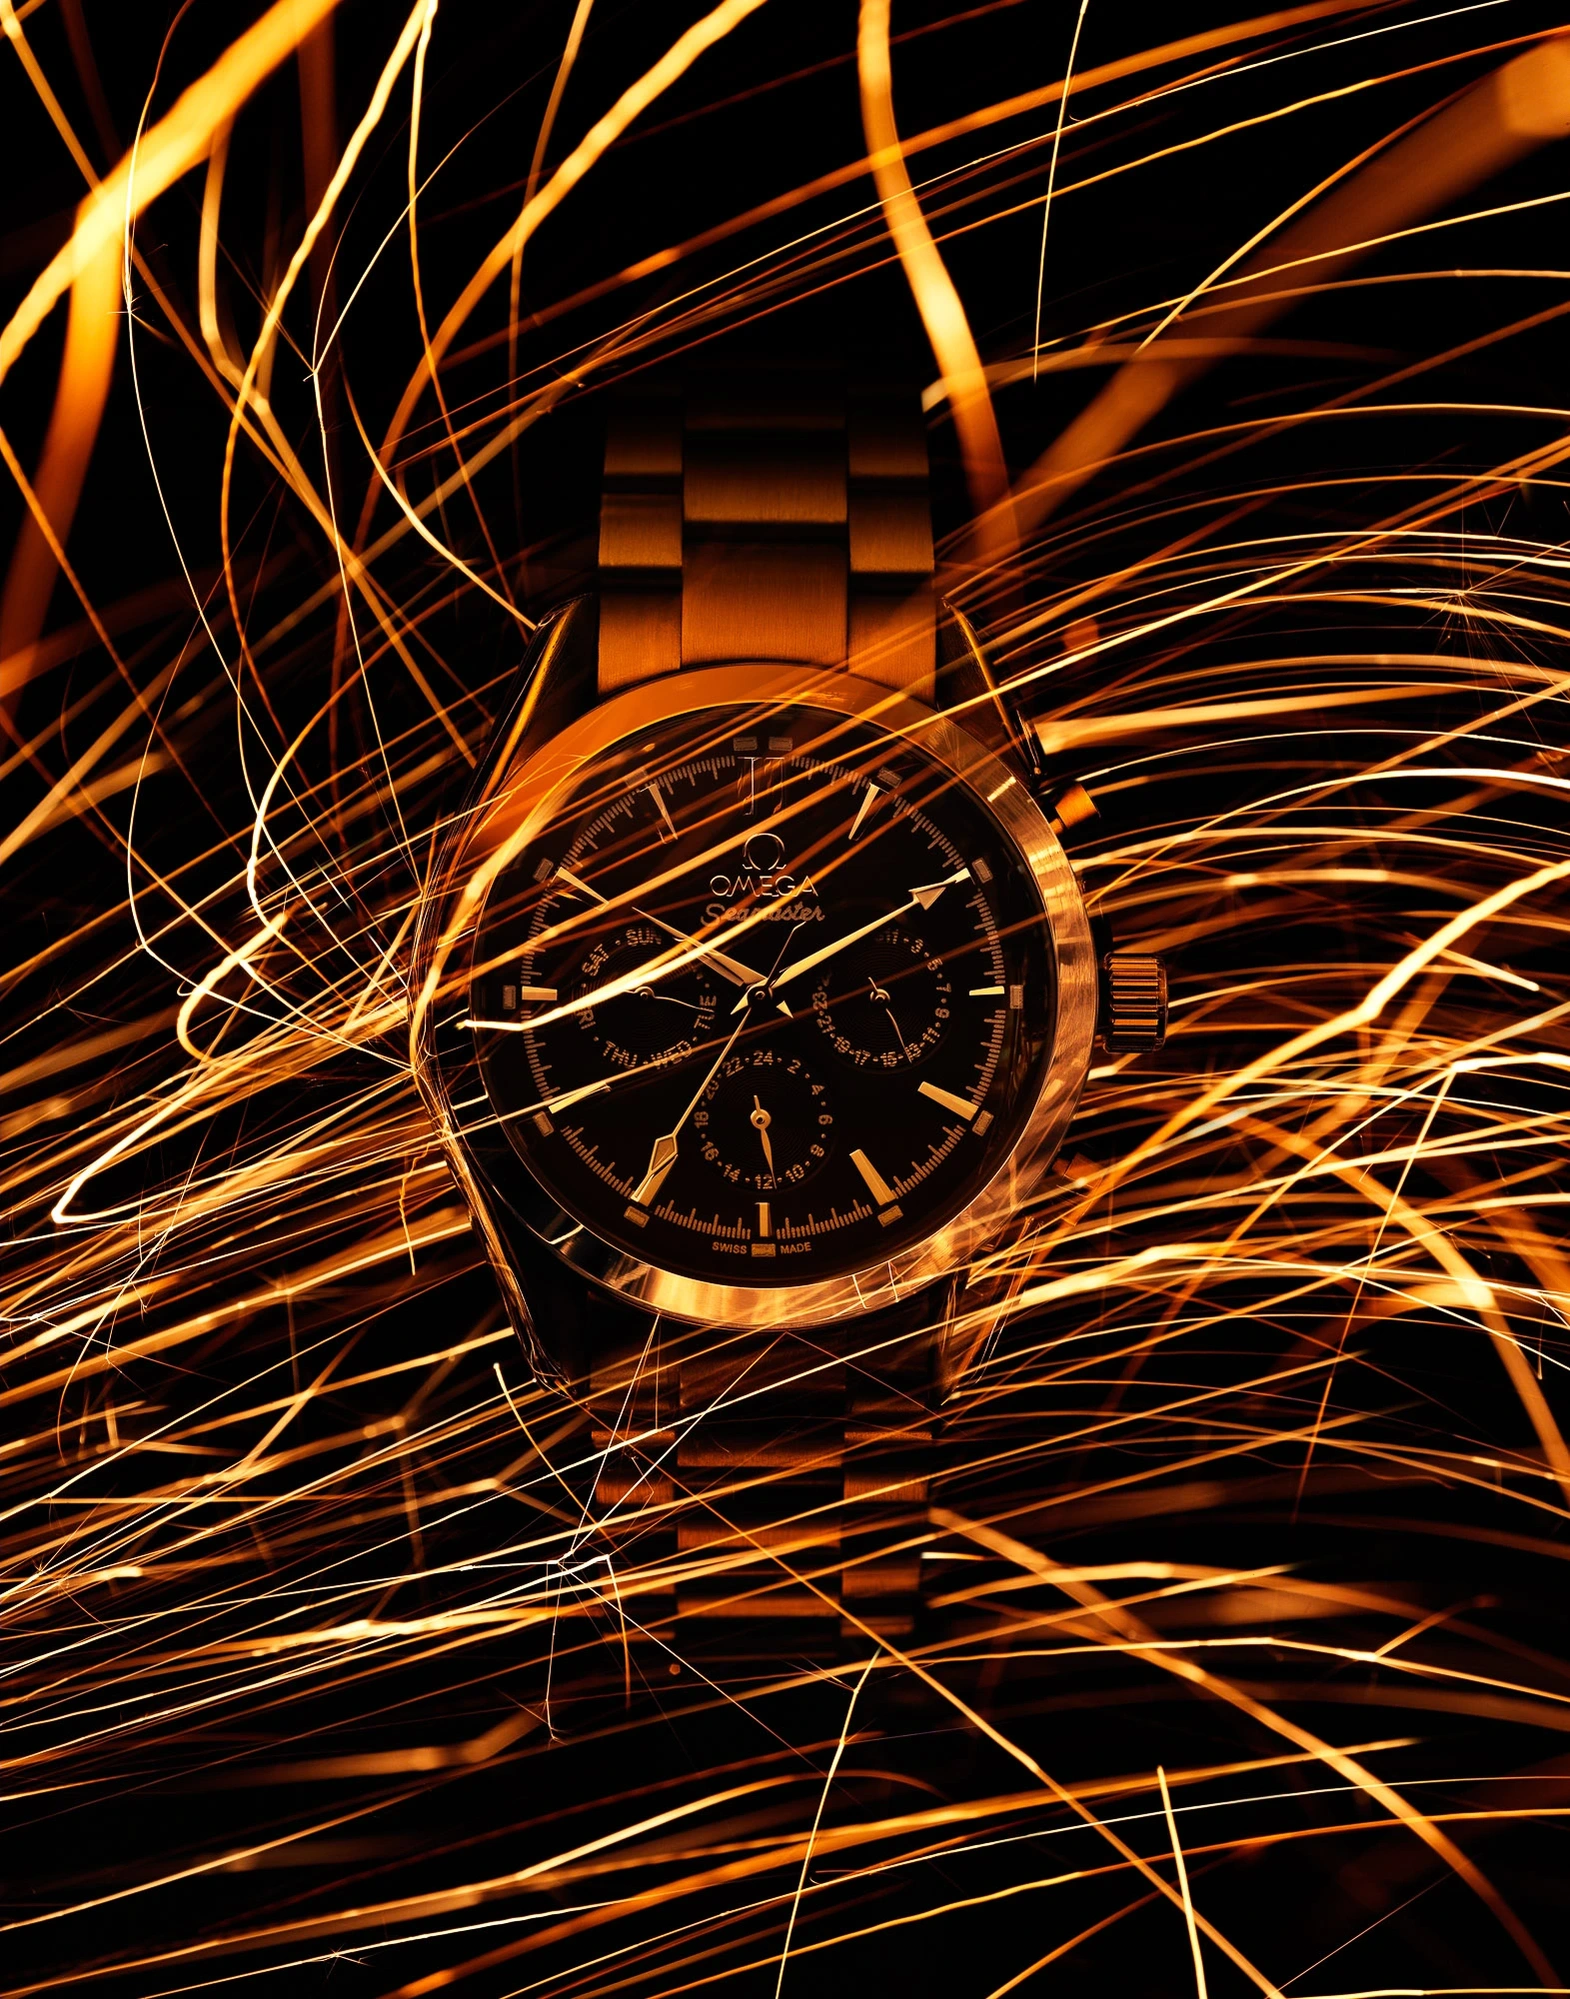 Timepiece and watch Photography by Timothy Hogan in Los Angeles